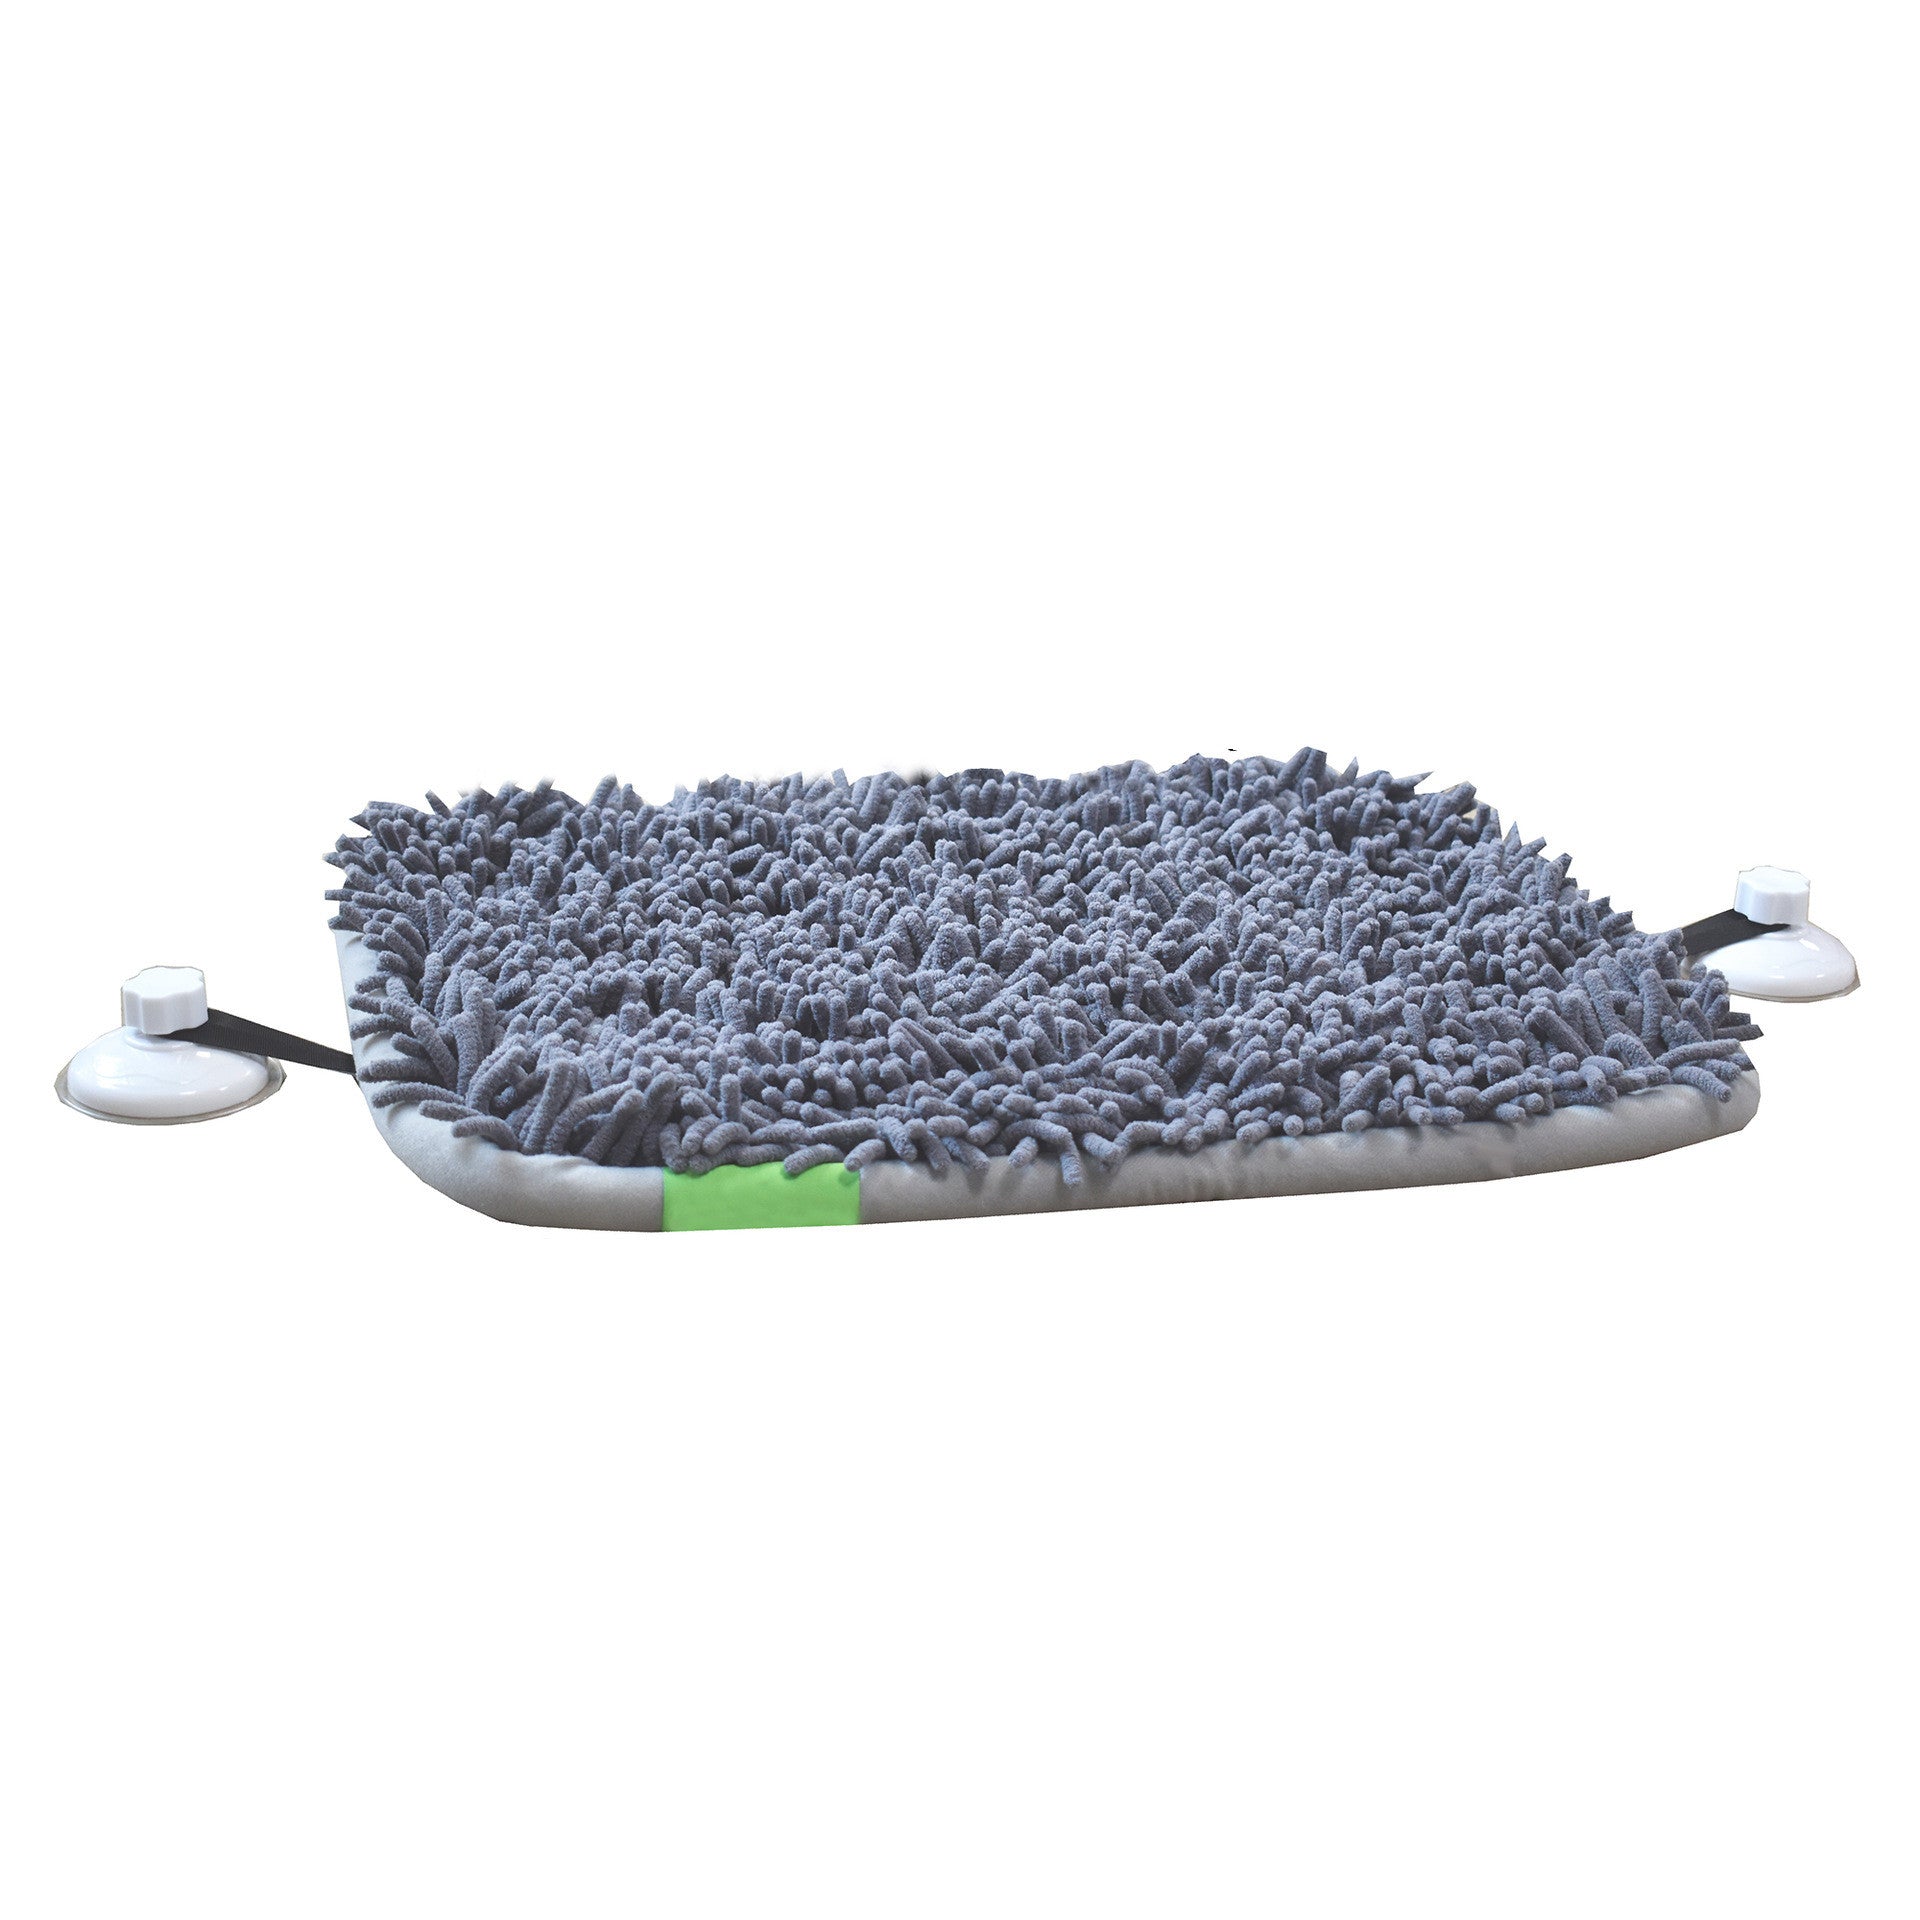 Grey Snuffle Mat, Foraging Mat for Dogs